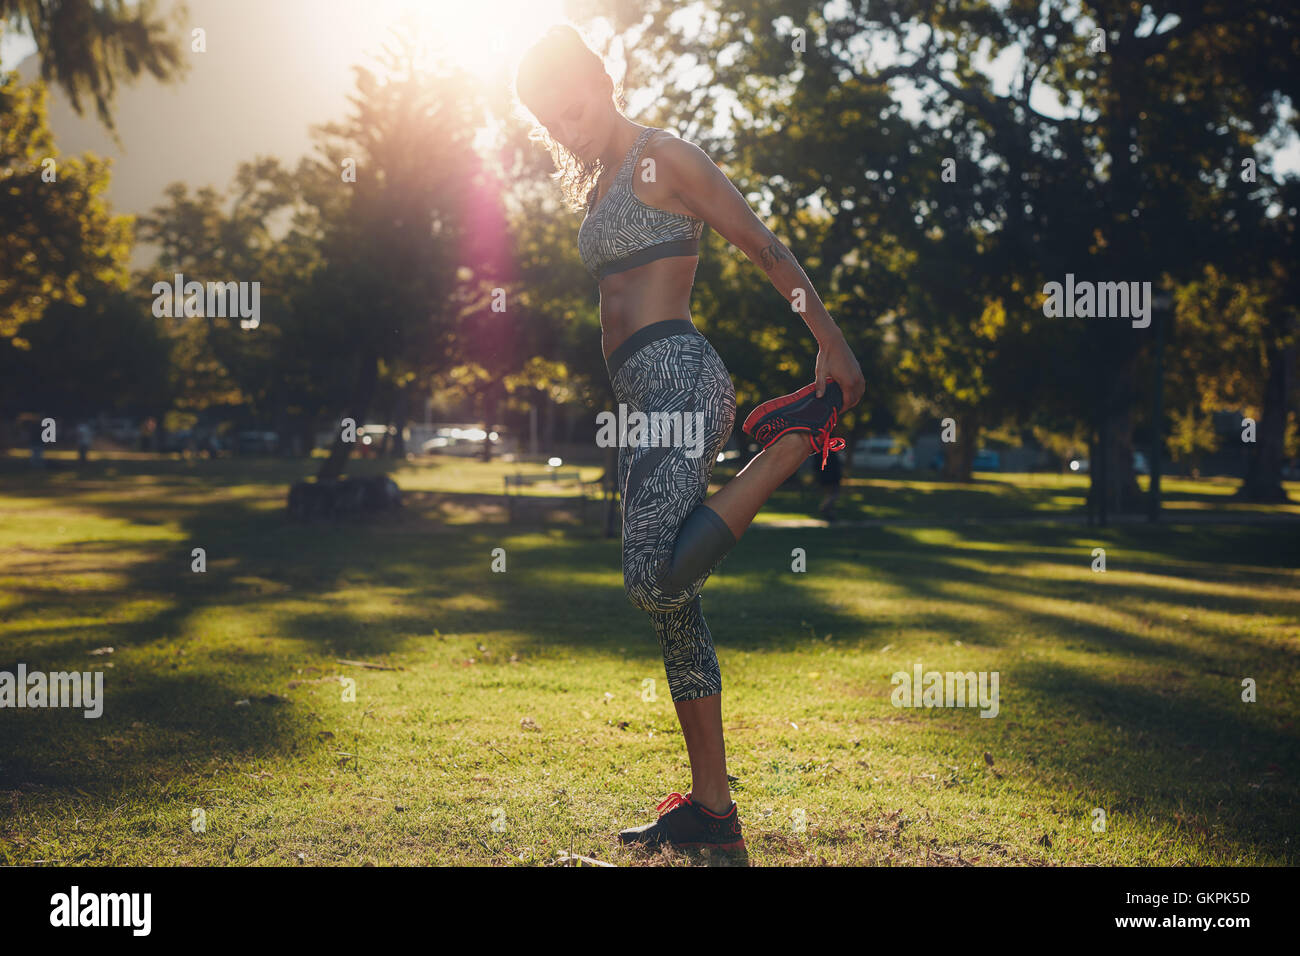 Full length portrait of healthy young woman working out in a park. Sportswoman warming up before training session outdoors on a Stock Photo